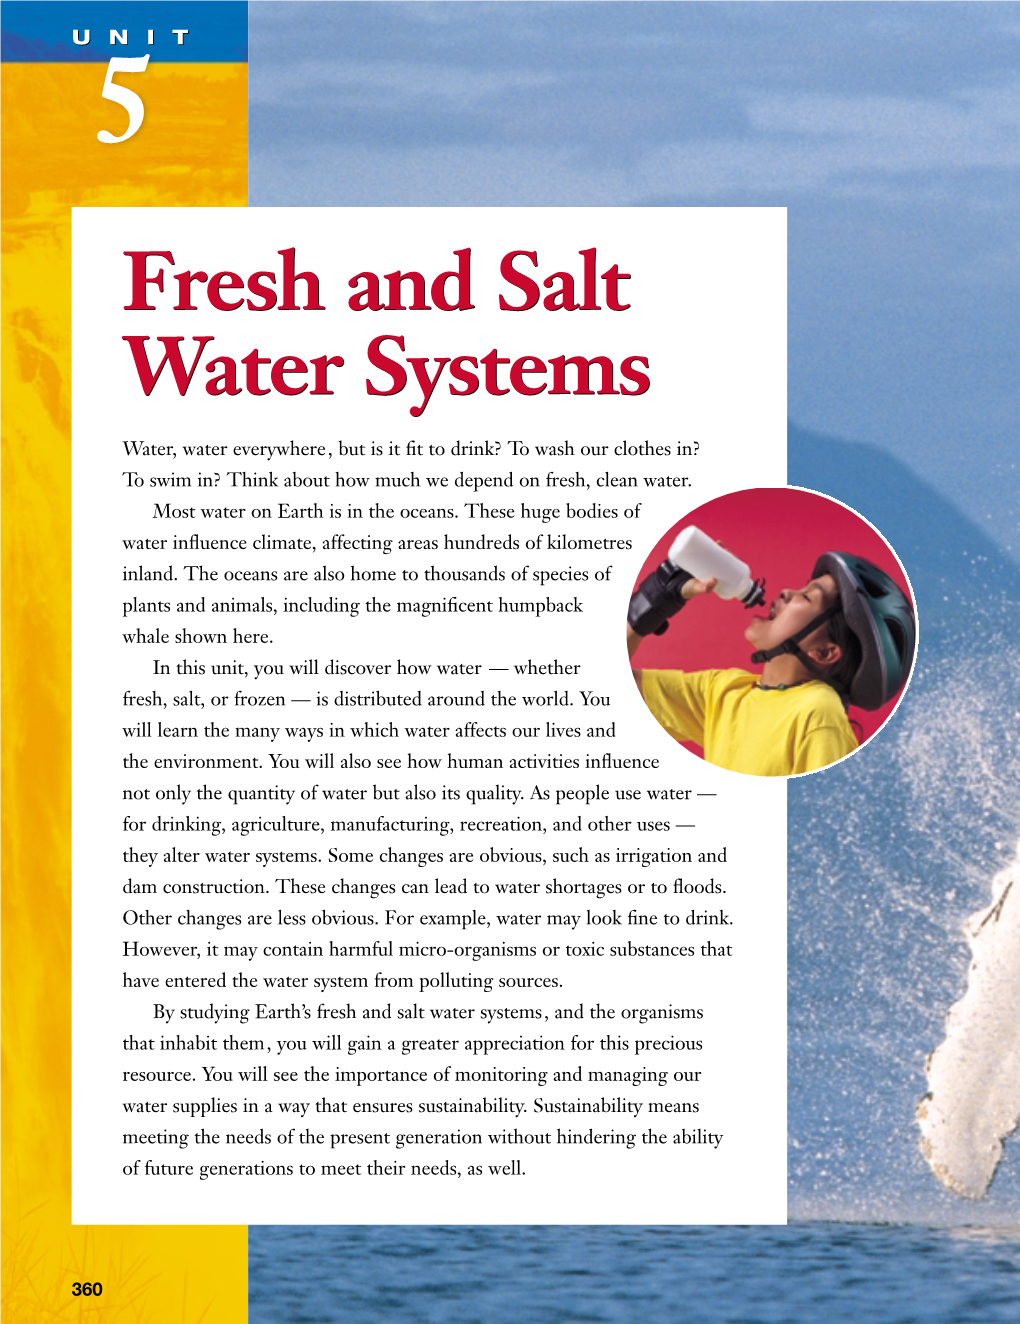 Fresh and Salt Water Systems